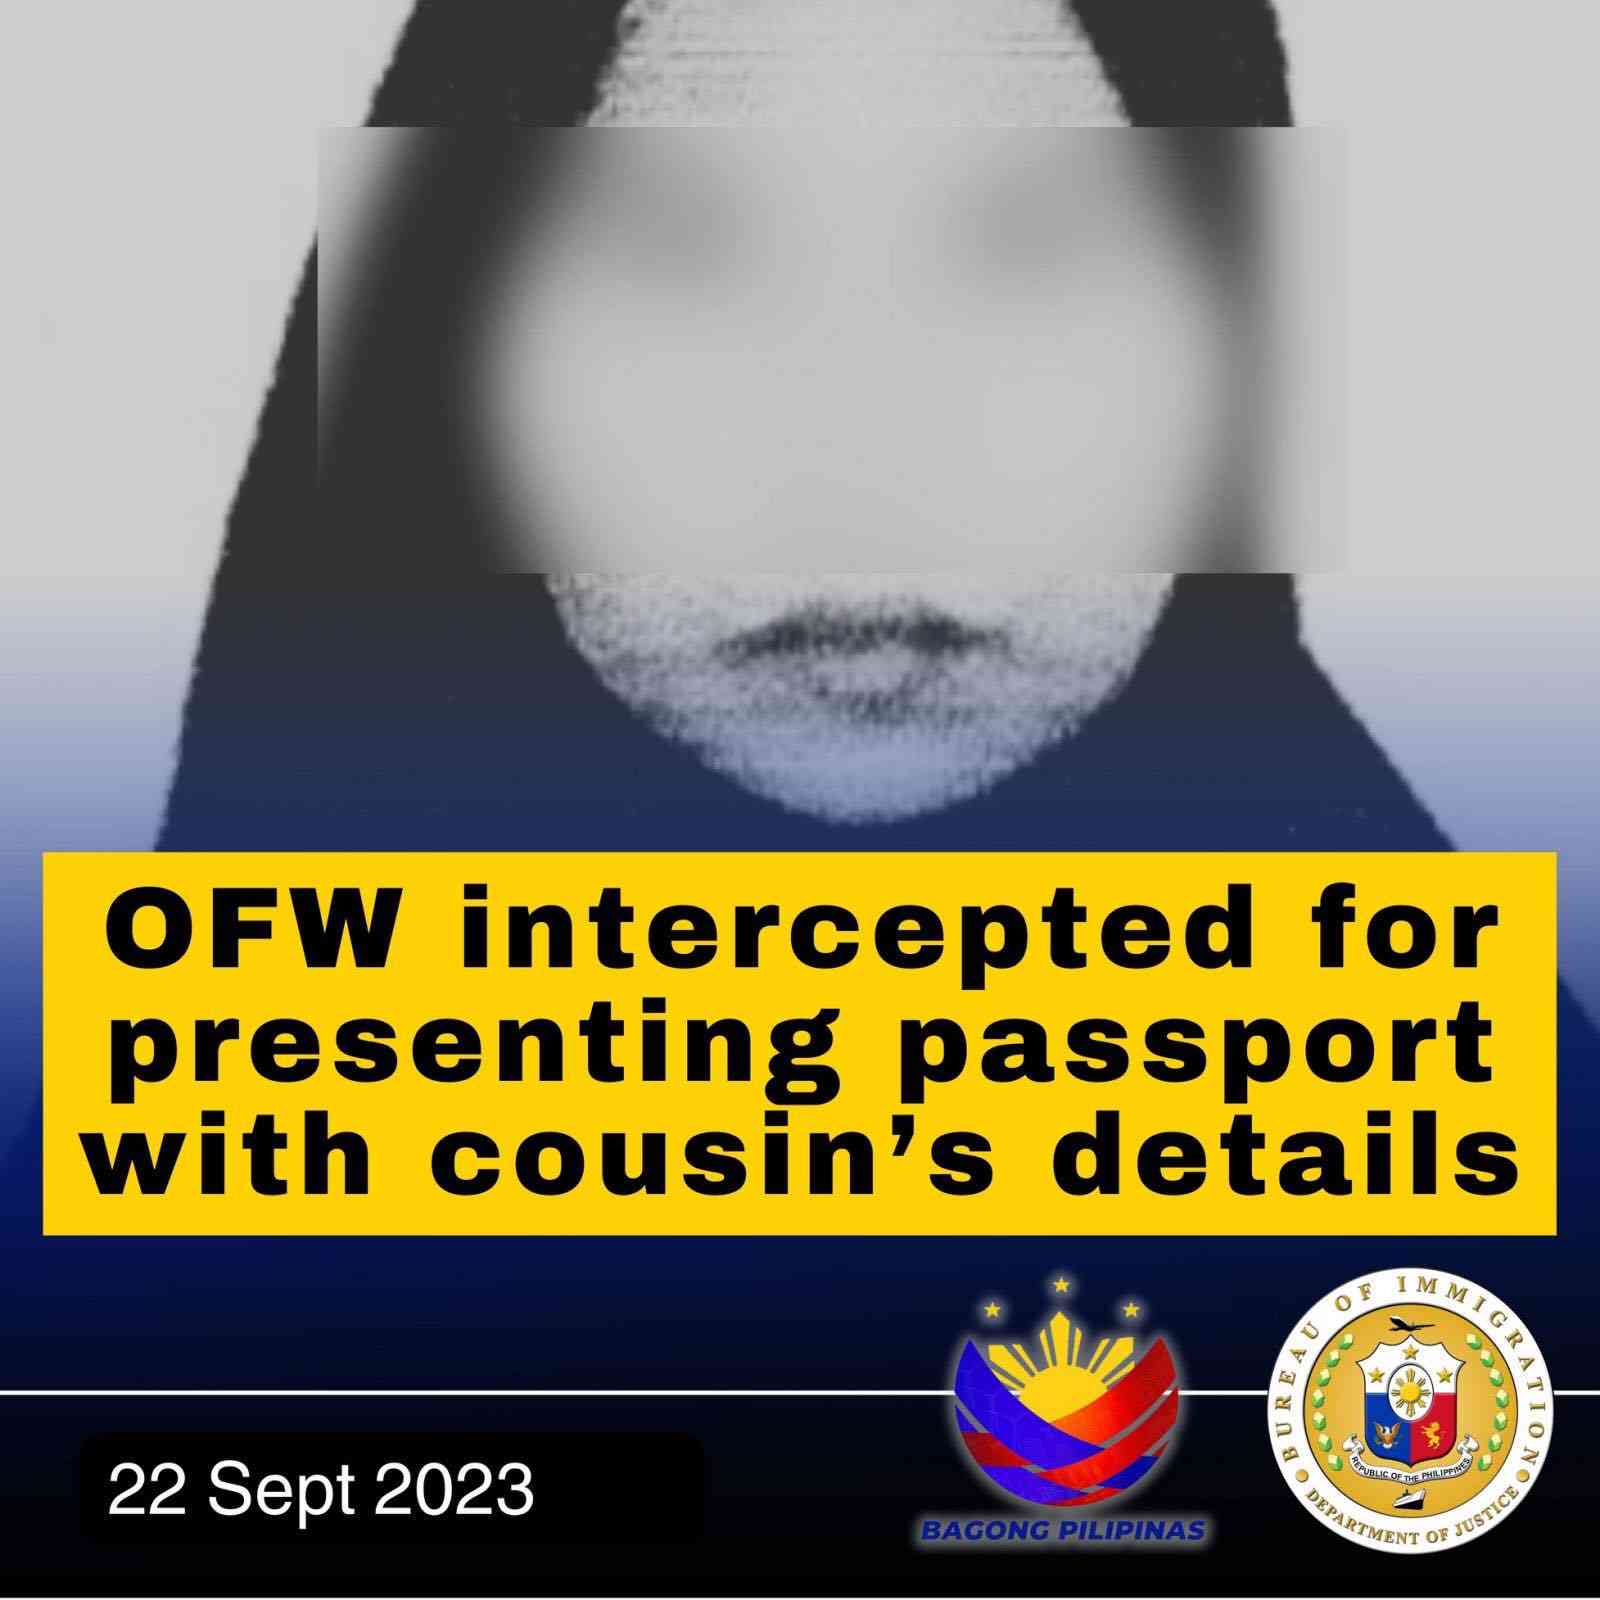 OFW intercepted for presenting passport with cousin’s details - BI